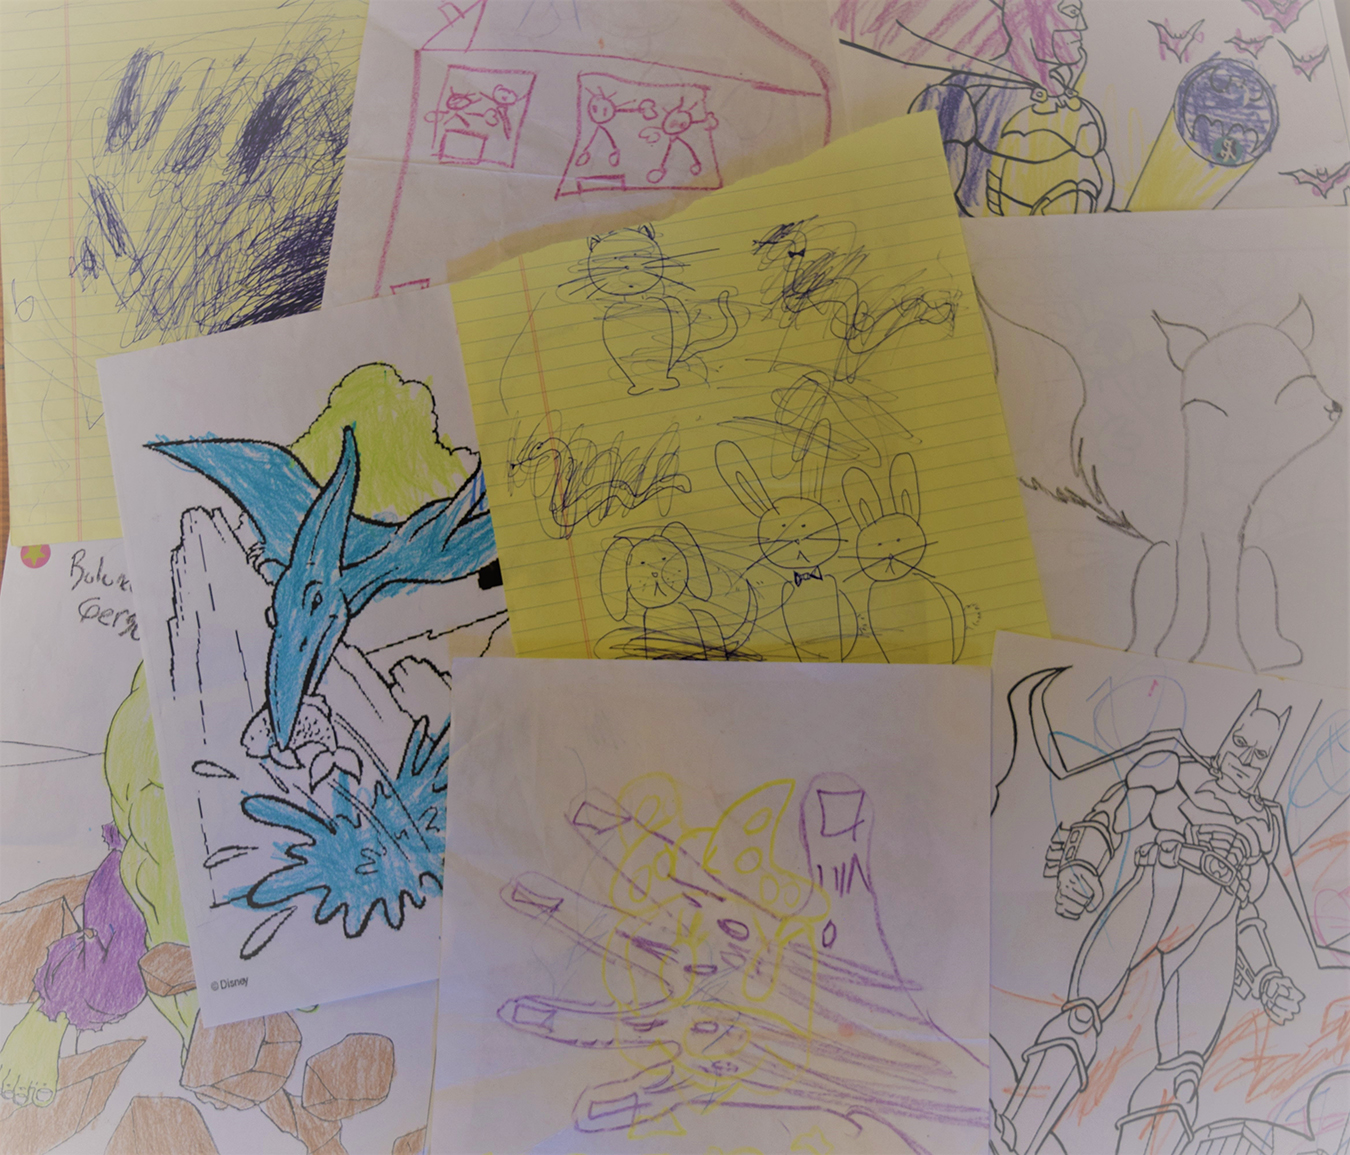 Drawings made by child detainees at Dilley and Karnes. Photo by Erin Routon.